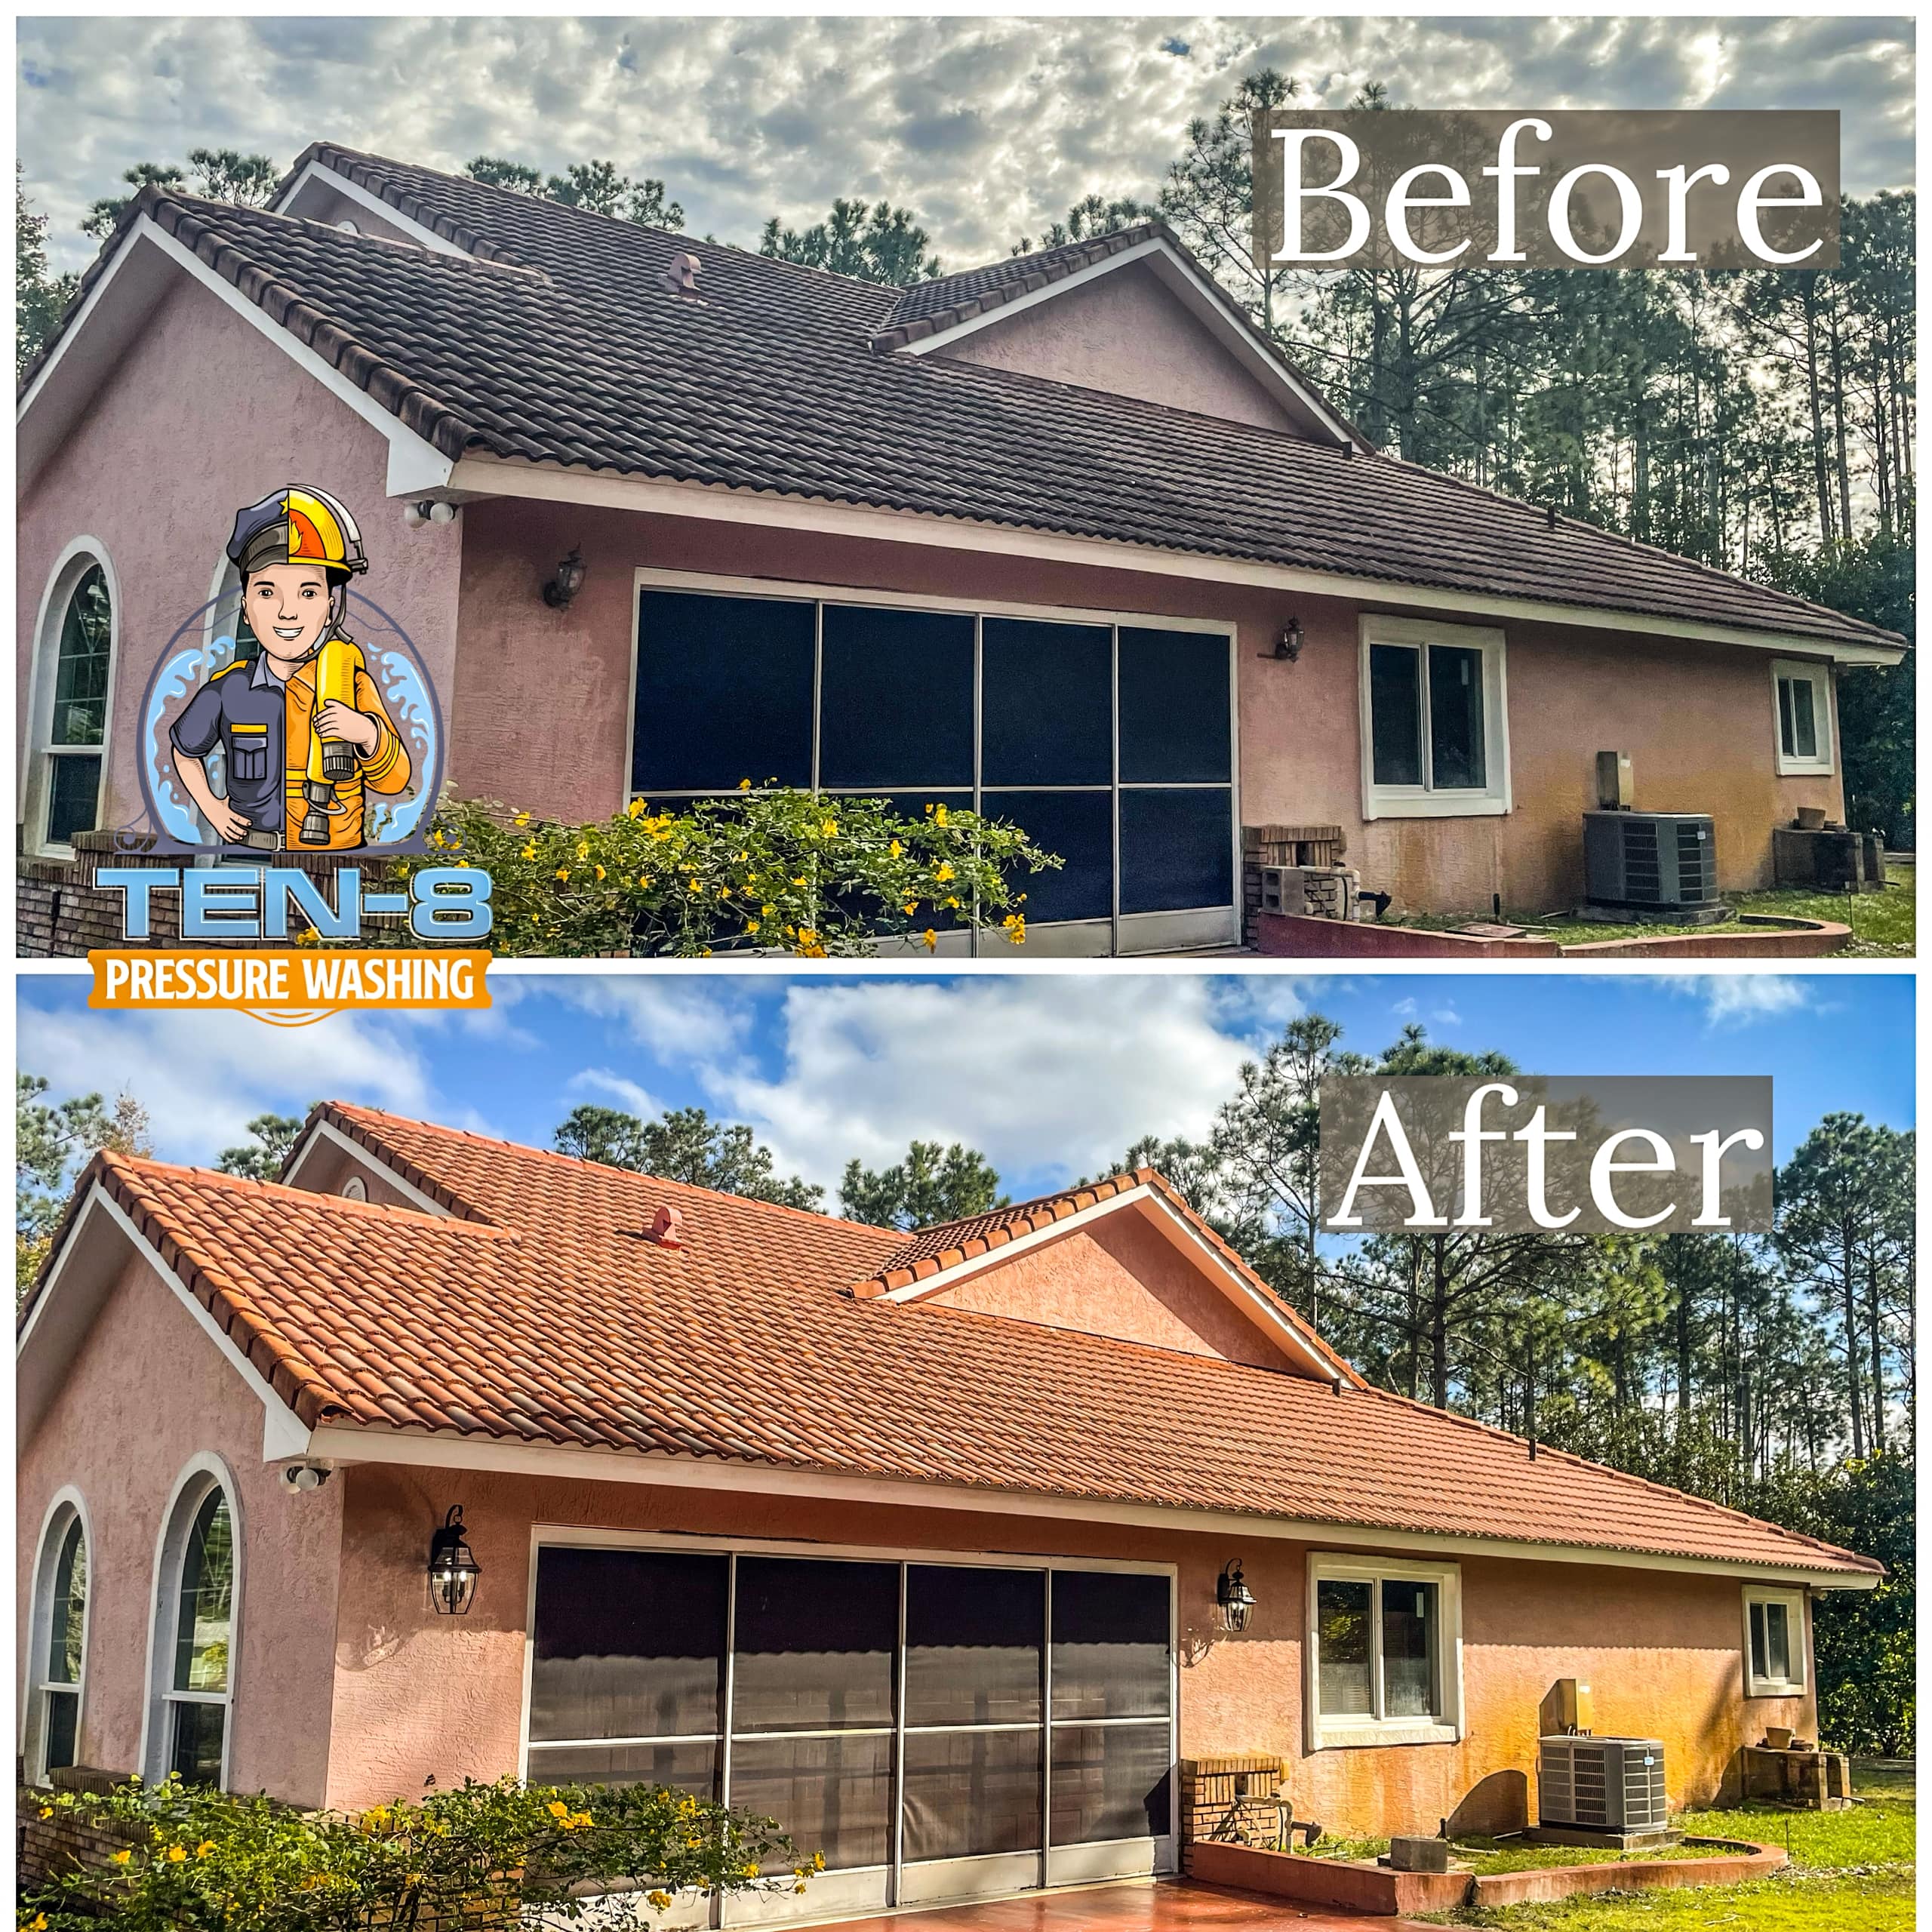 Spanish Tile Roof washing / Roof cleaning in Palm Coast Florida 32164